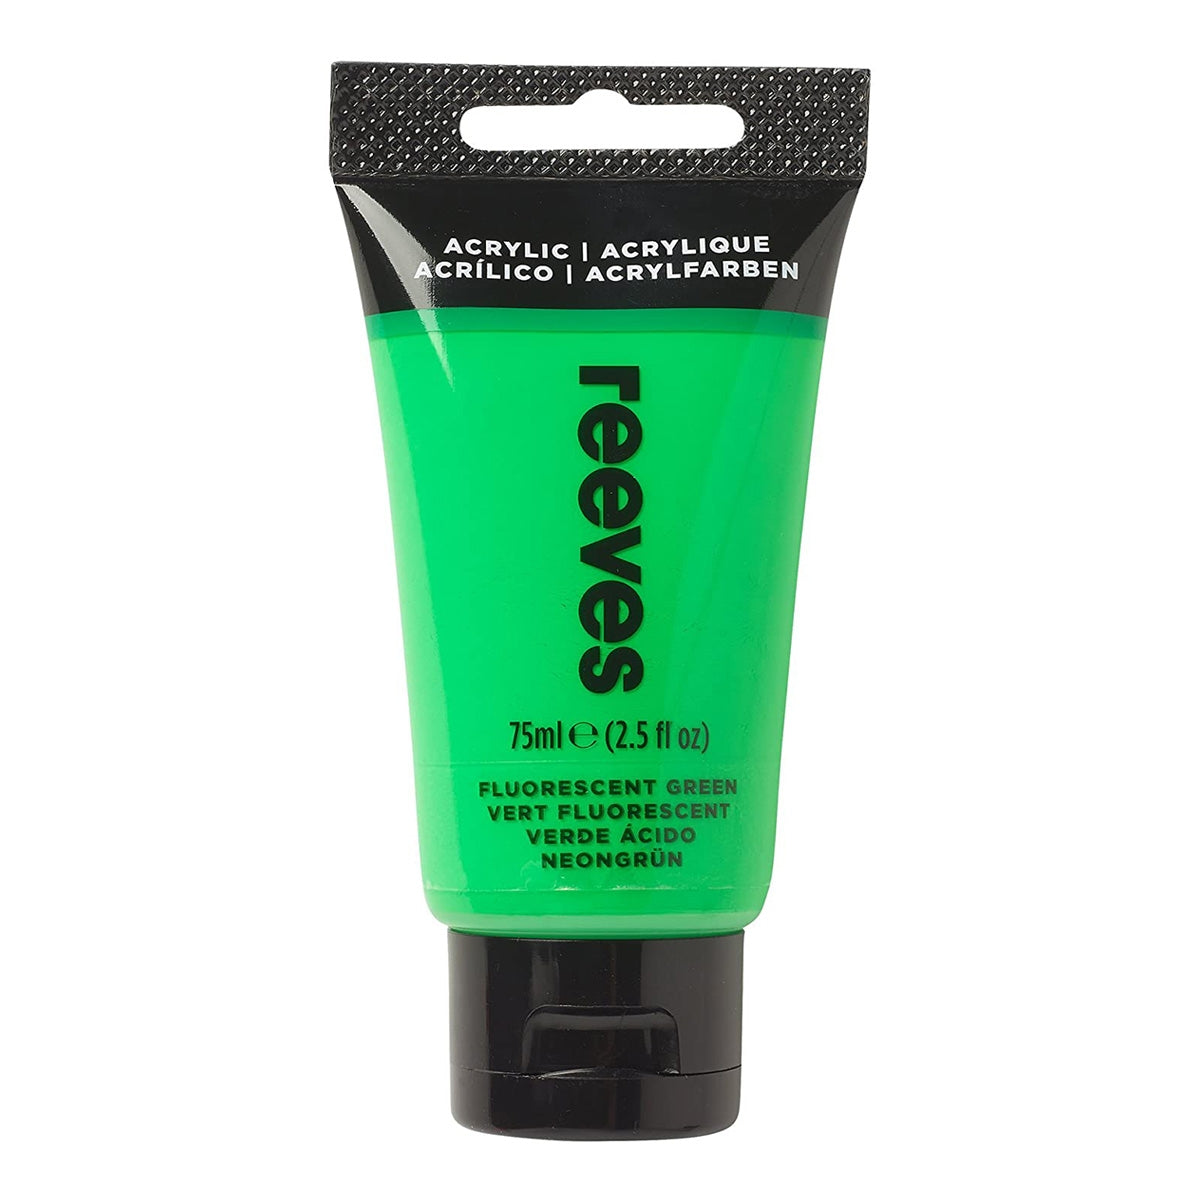 Reeves - Green fluorescent - acrylique fin - 75 ml